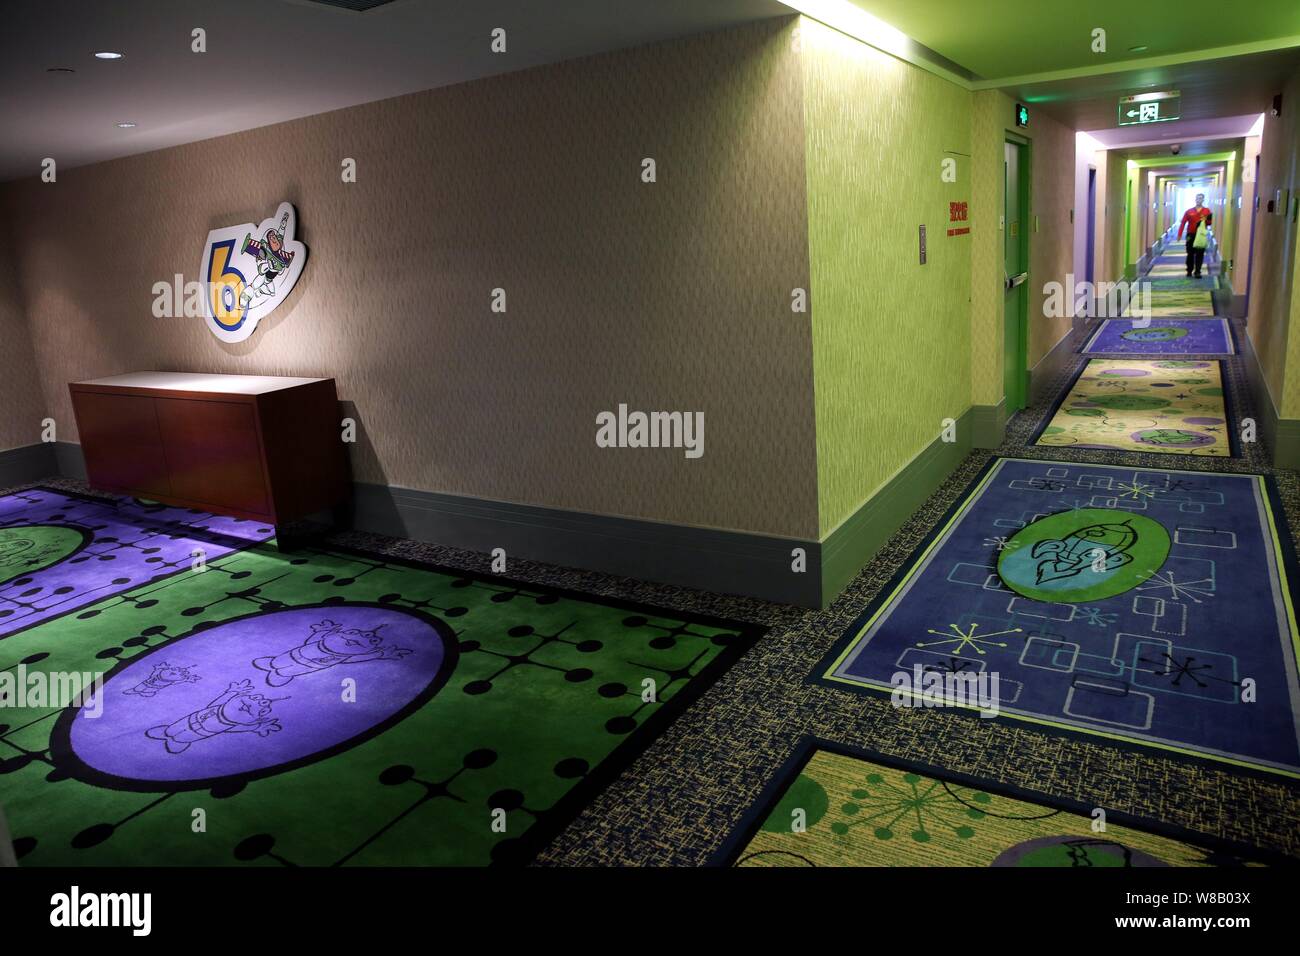 View Of A Corridor In The Toy Story Hotel At The Shanghai Disney Resort In Pudong Shanghai China 14 June 16 The Shanghai Disneyland Hotel And Stock Photo Alamy